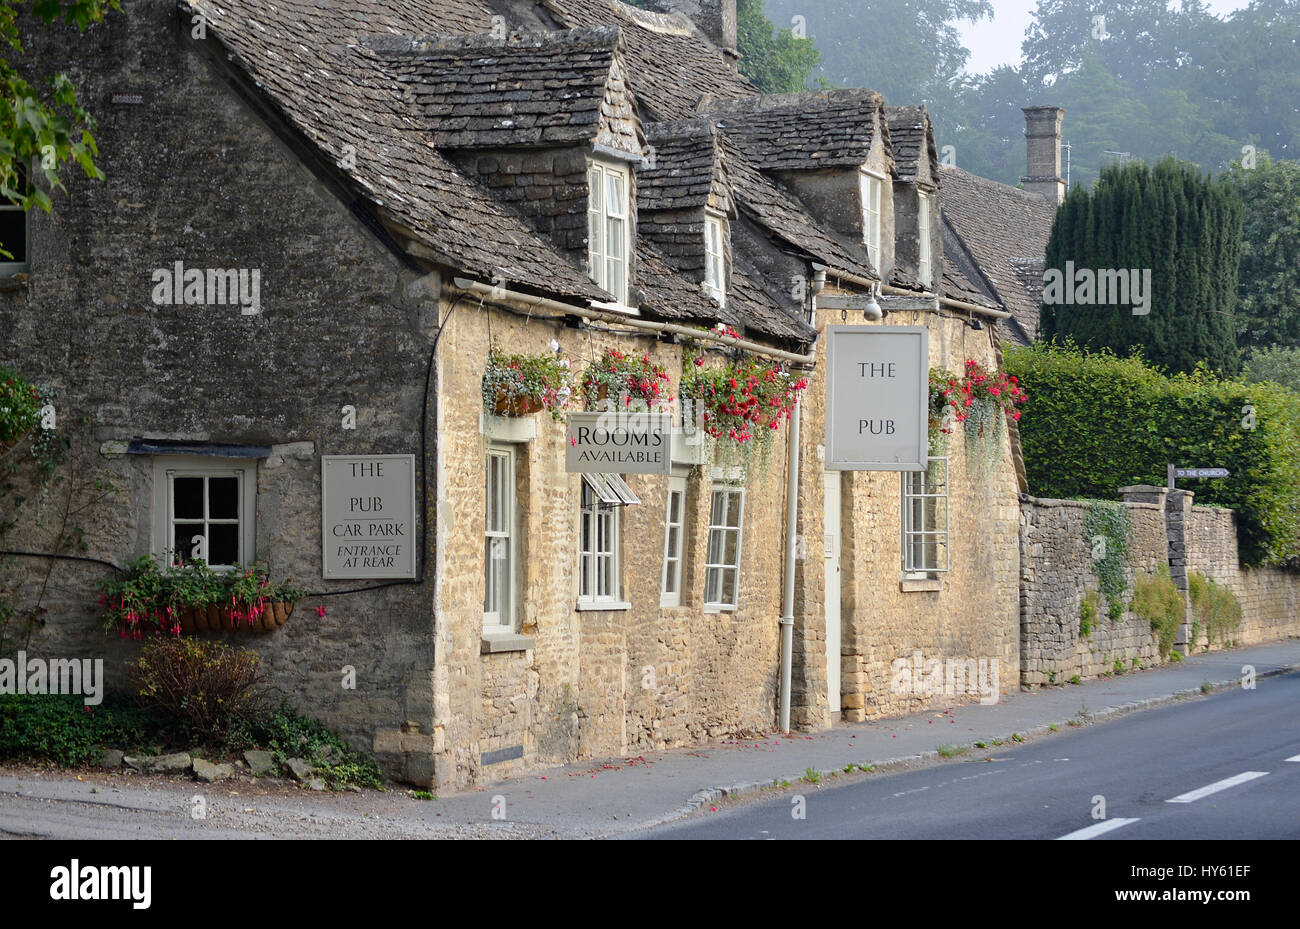 Old pub built out of Cotswold stone with stone tiles (slates) and hanging baskets in a town in the Cotswolds, England, UK. Stock Photo